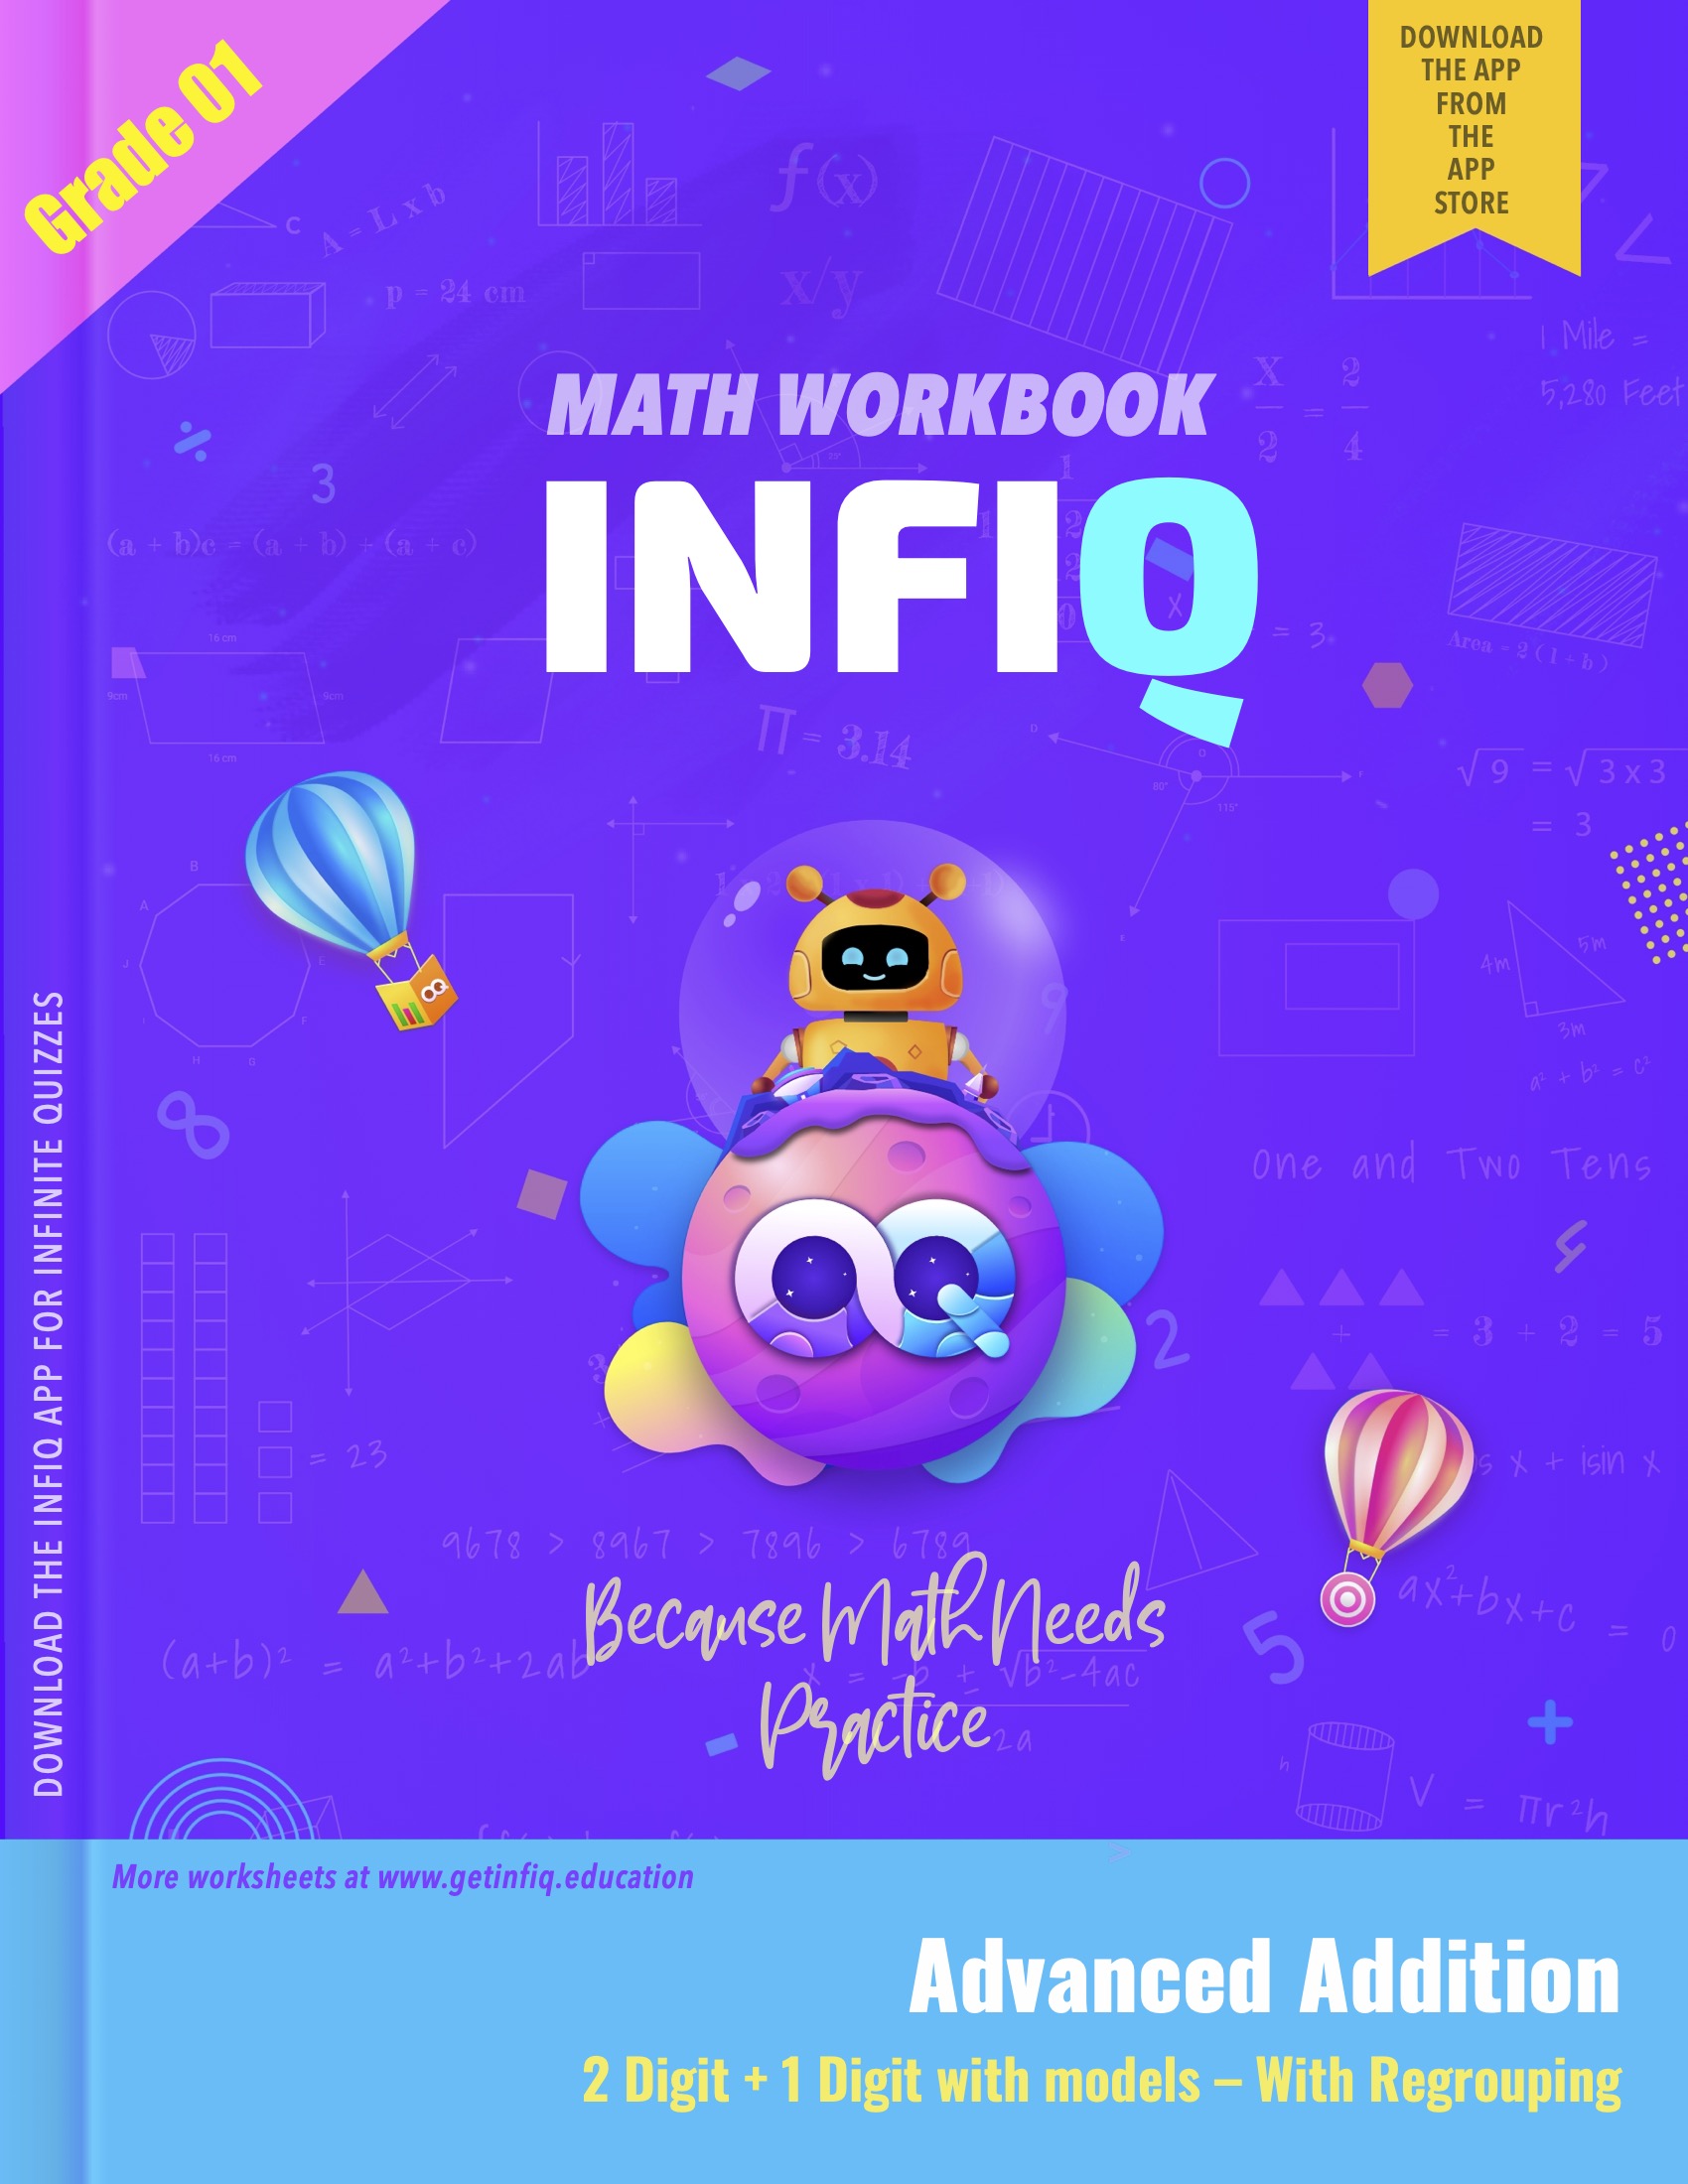 Grade 1 - 2 Digit + 1 Digit with models – With Regrouping Workbook